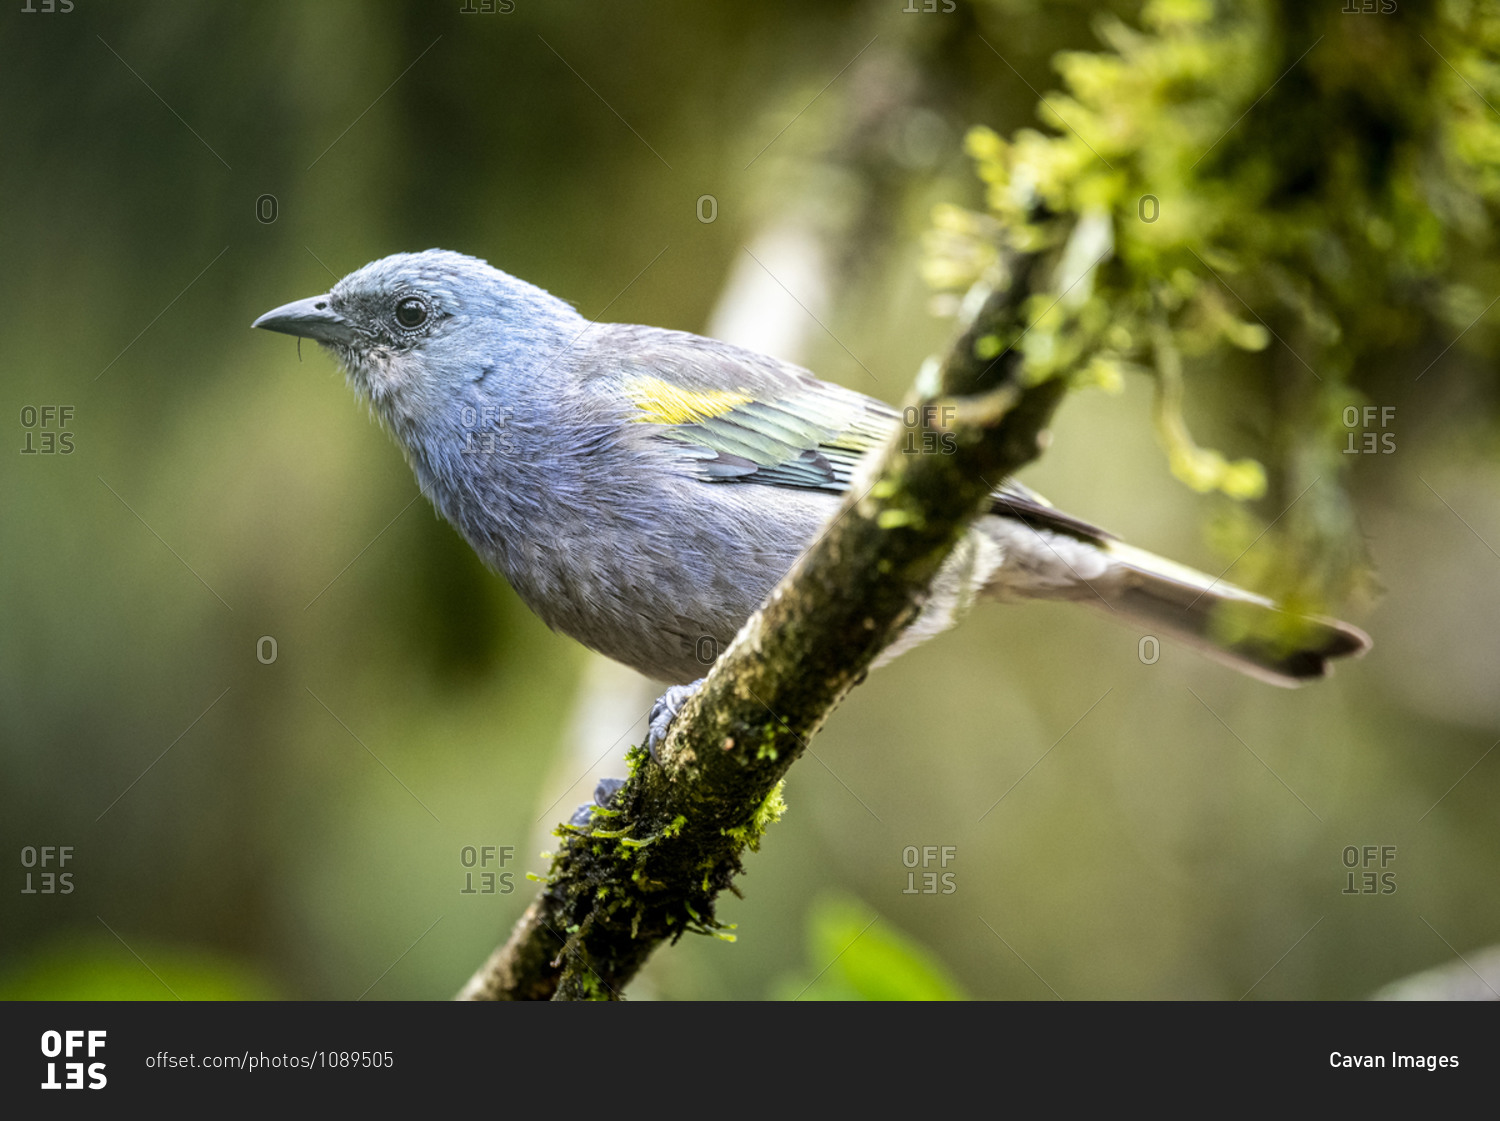 Beautiful colorful tropical bird on tree branch in green rainforest